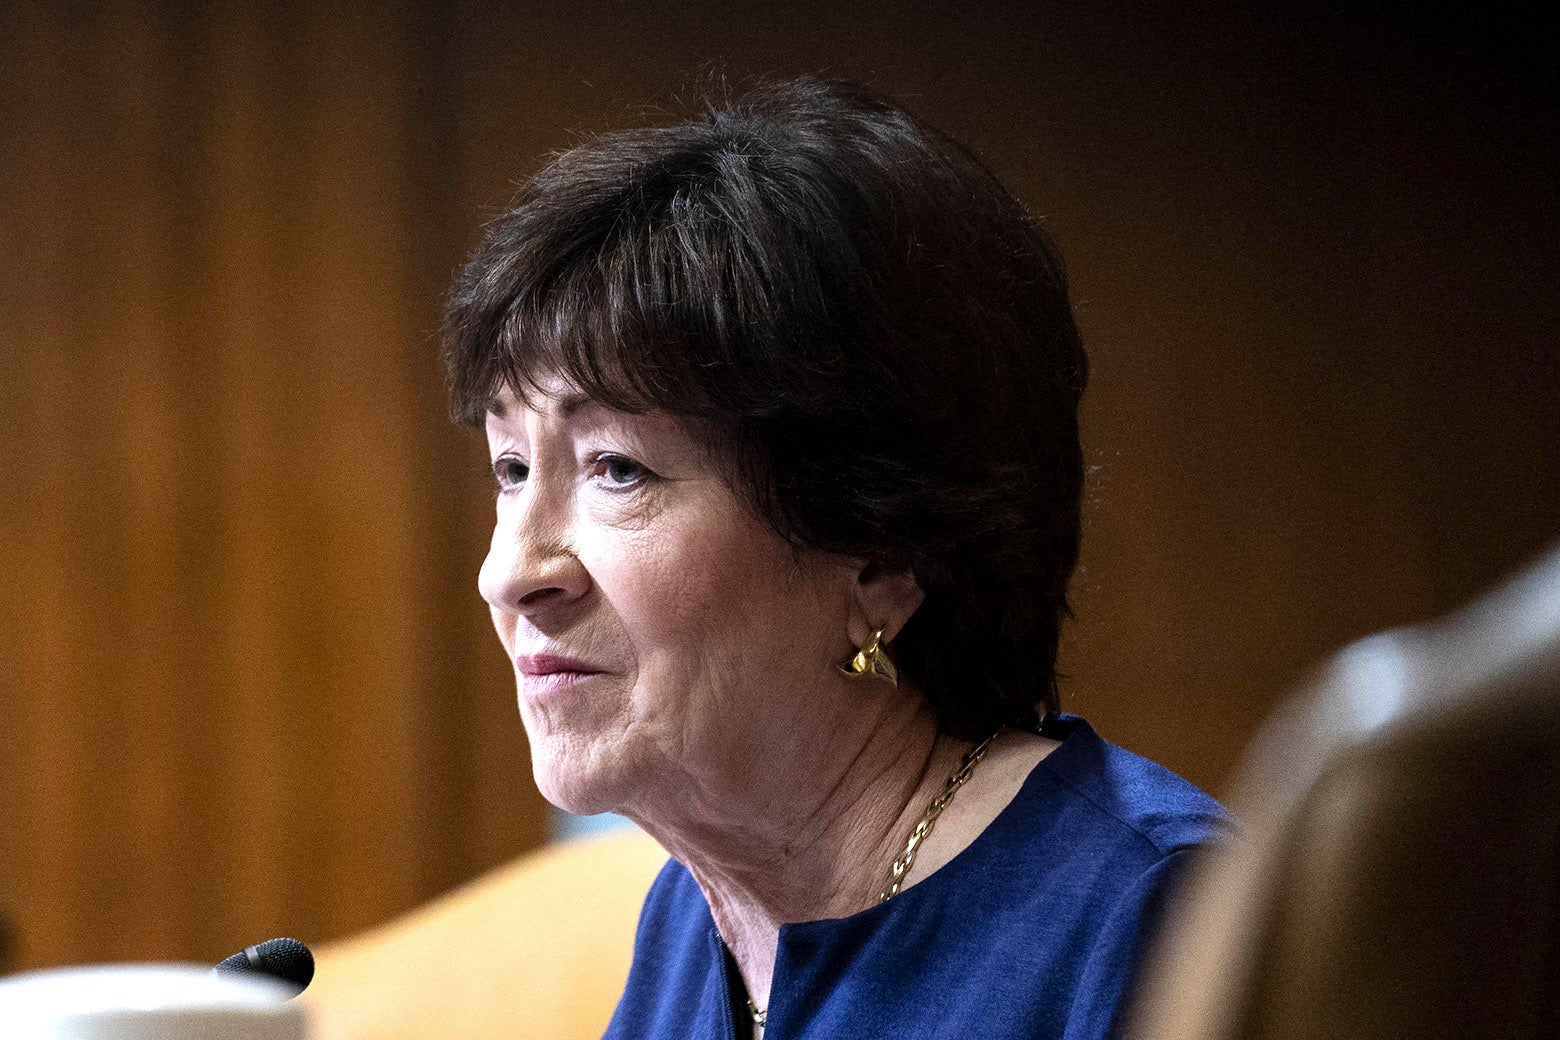 Susan Collins sits in a blue top, behind a set of microphones, gazing to the left.